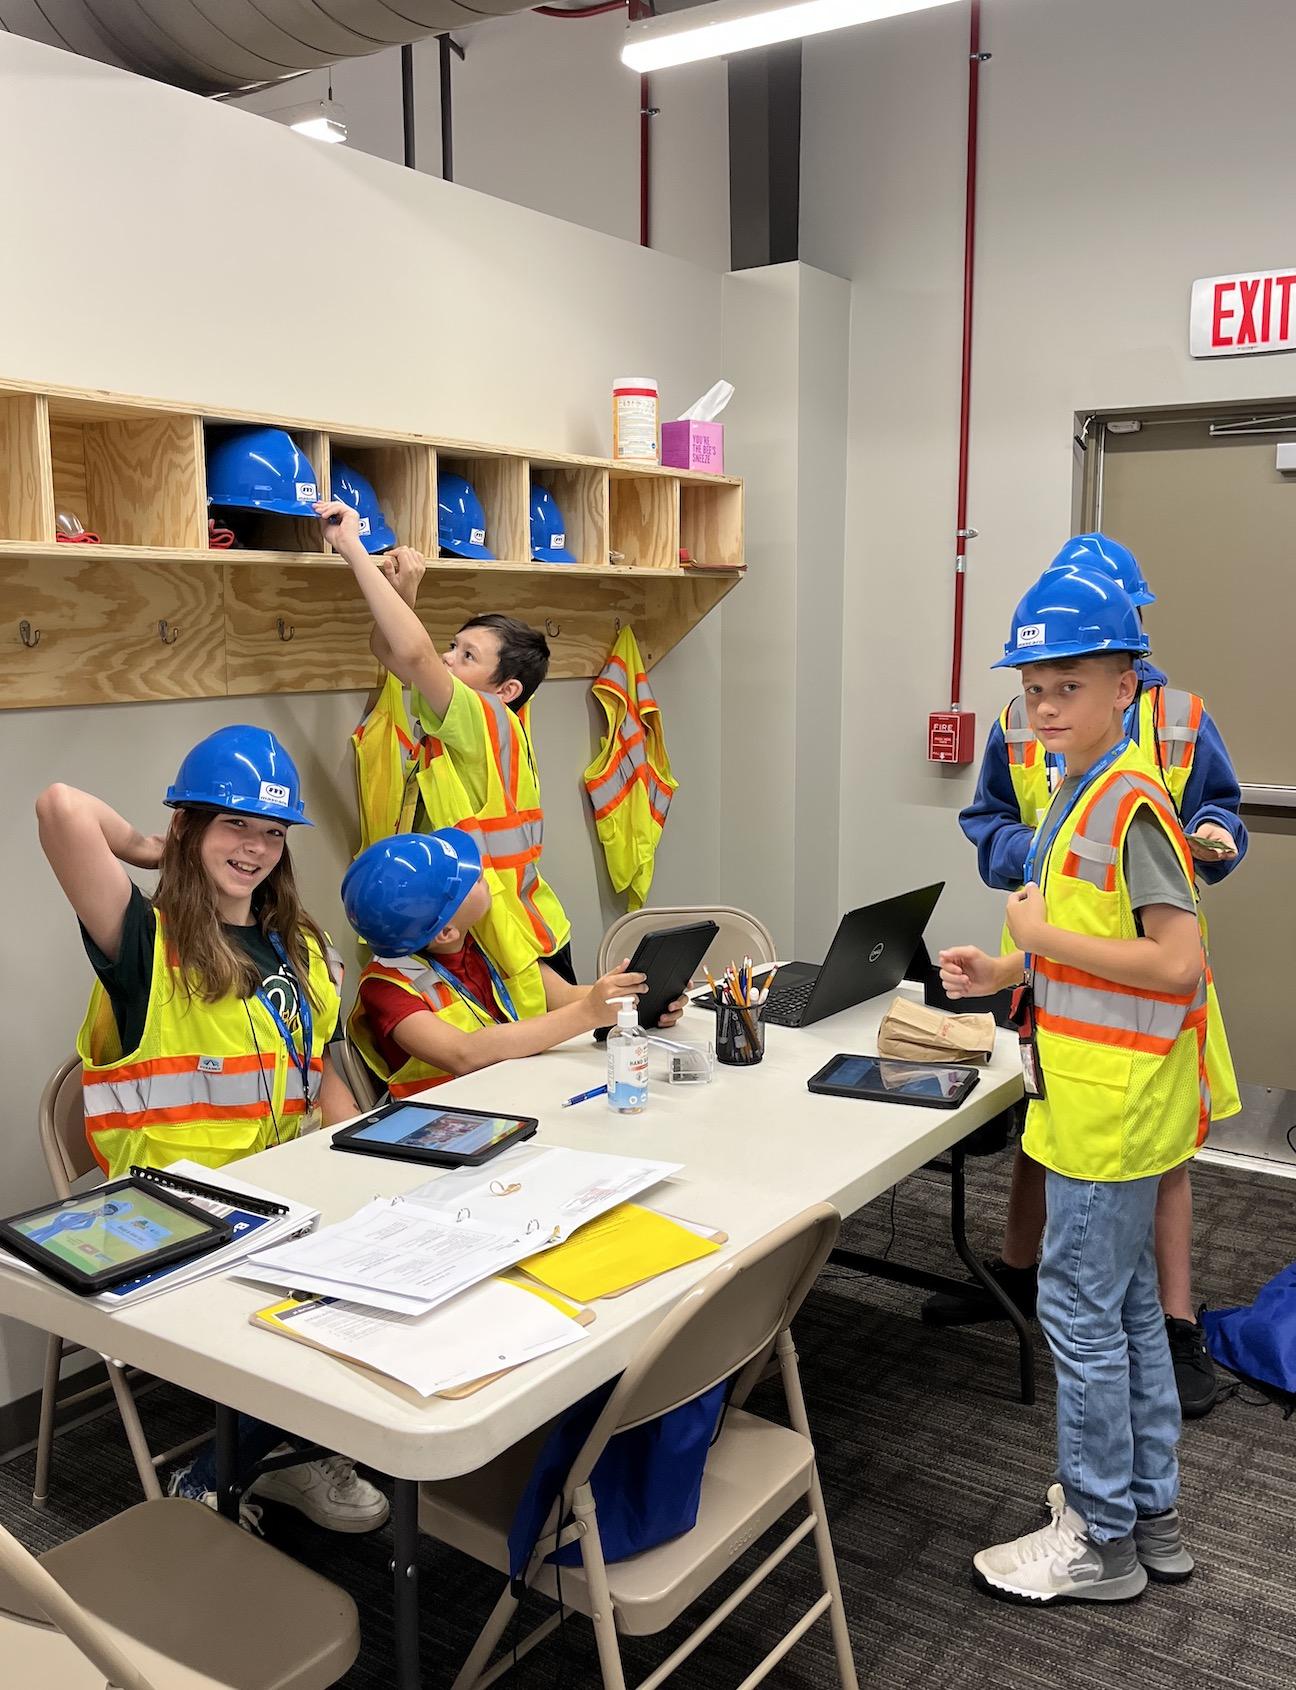 Role-playing as Mascaro Workers were Shelby Marrow (CEO), Freddy Ramien (CFO), Levi Driskill (Superintendent), Joey Prosdocimo and Myron Steimer (Trades Persons)